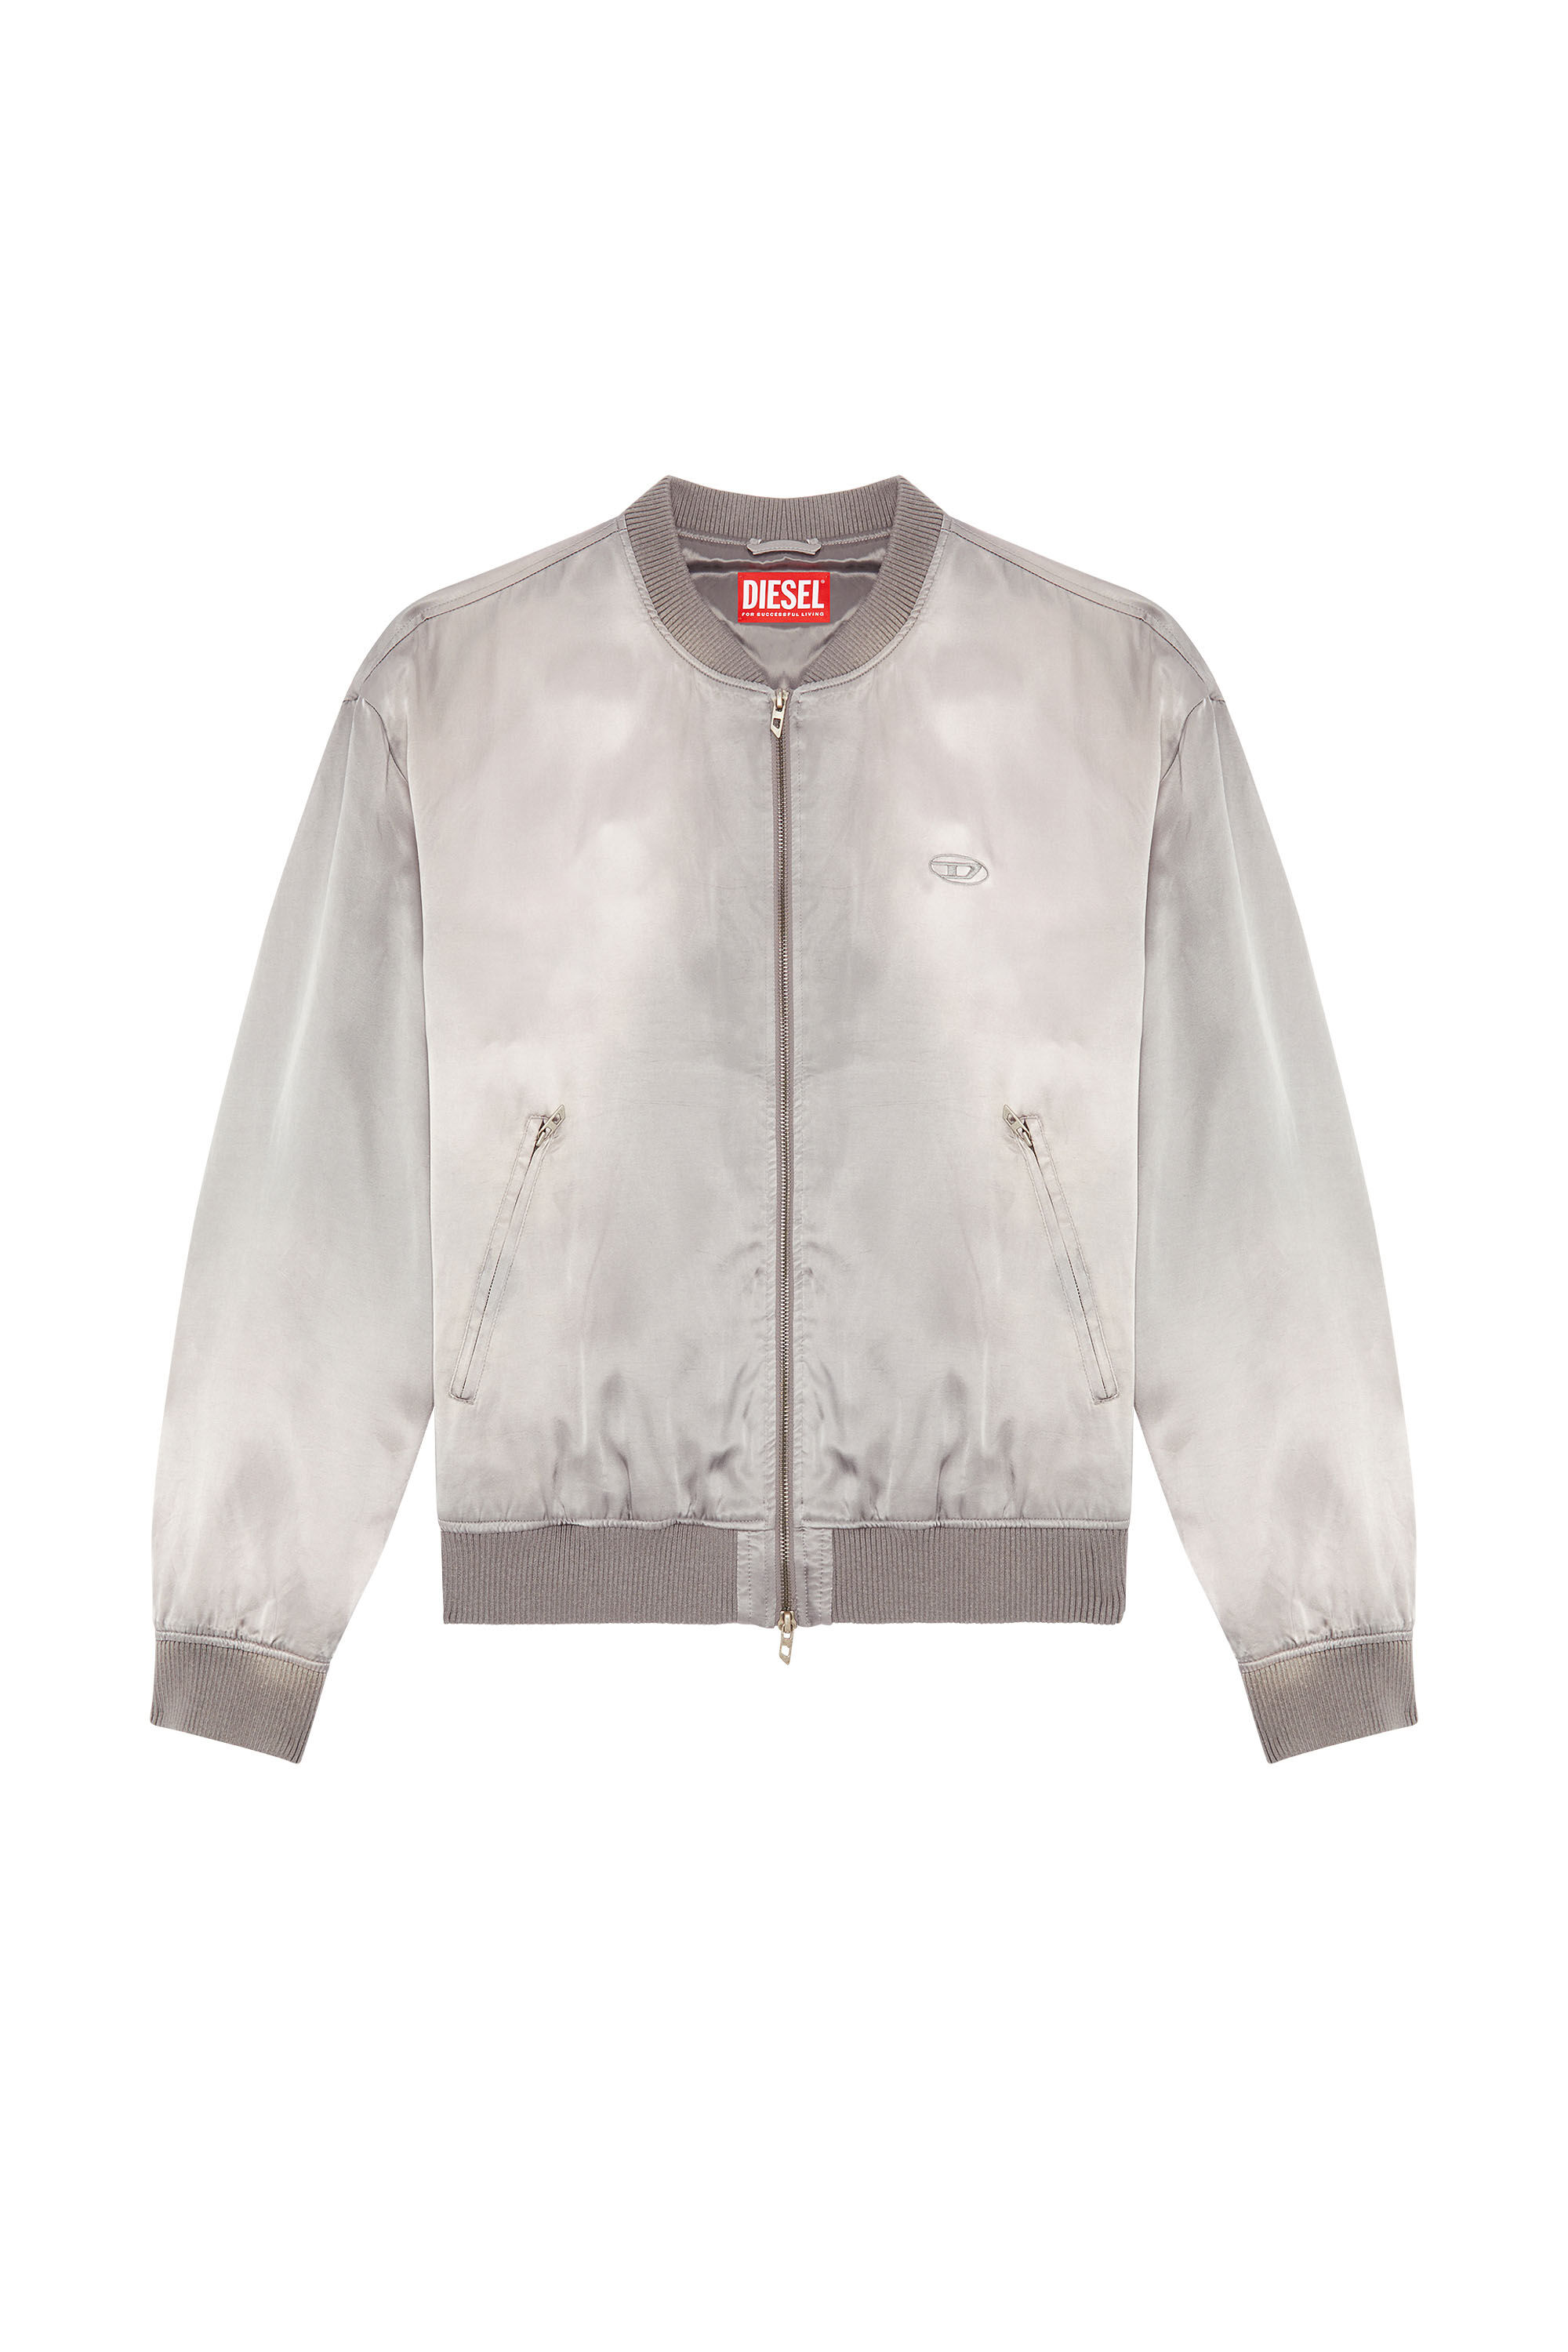 Diesel - J-MARTEX, Man Satin bomber jacket with faded effect in Grey - Image 5